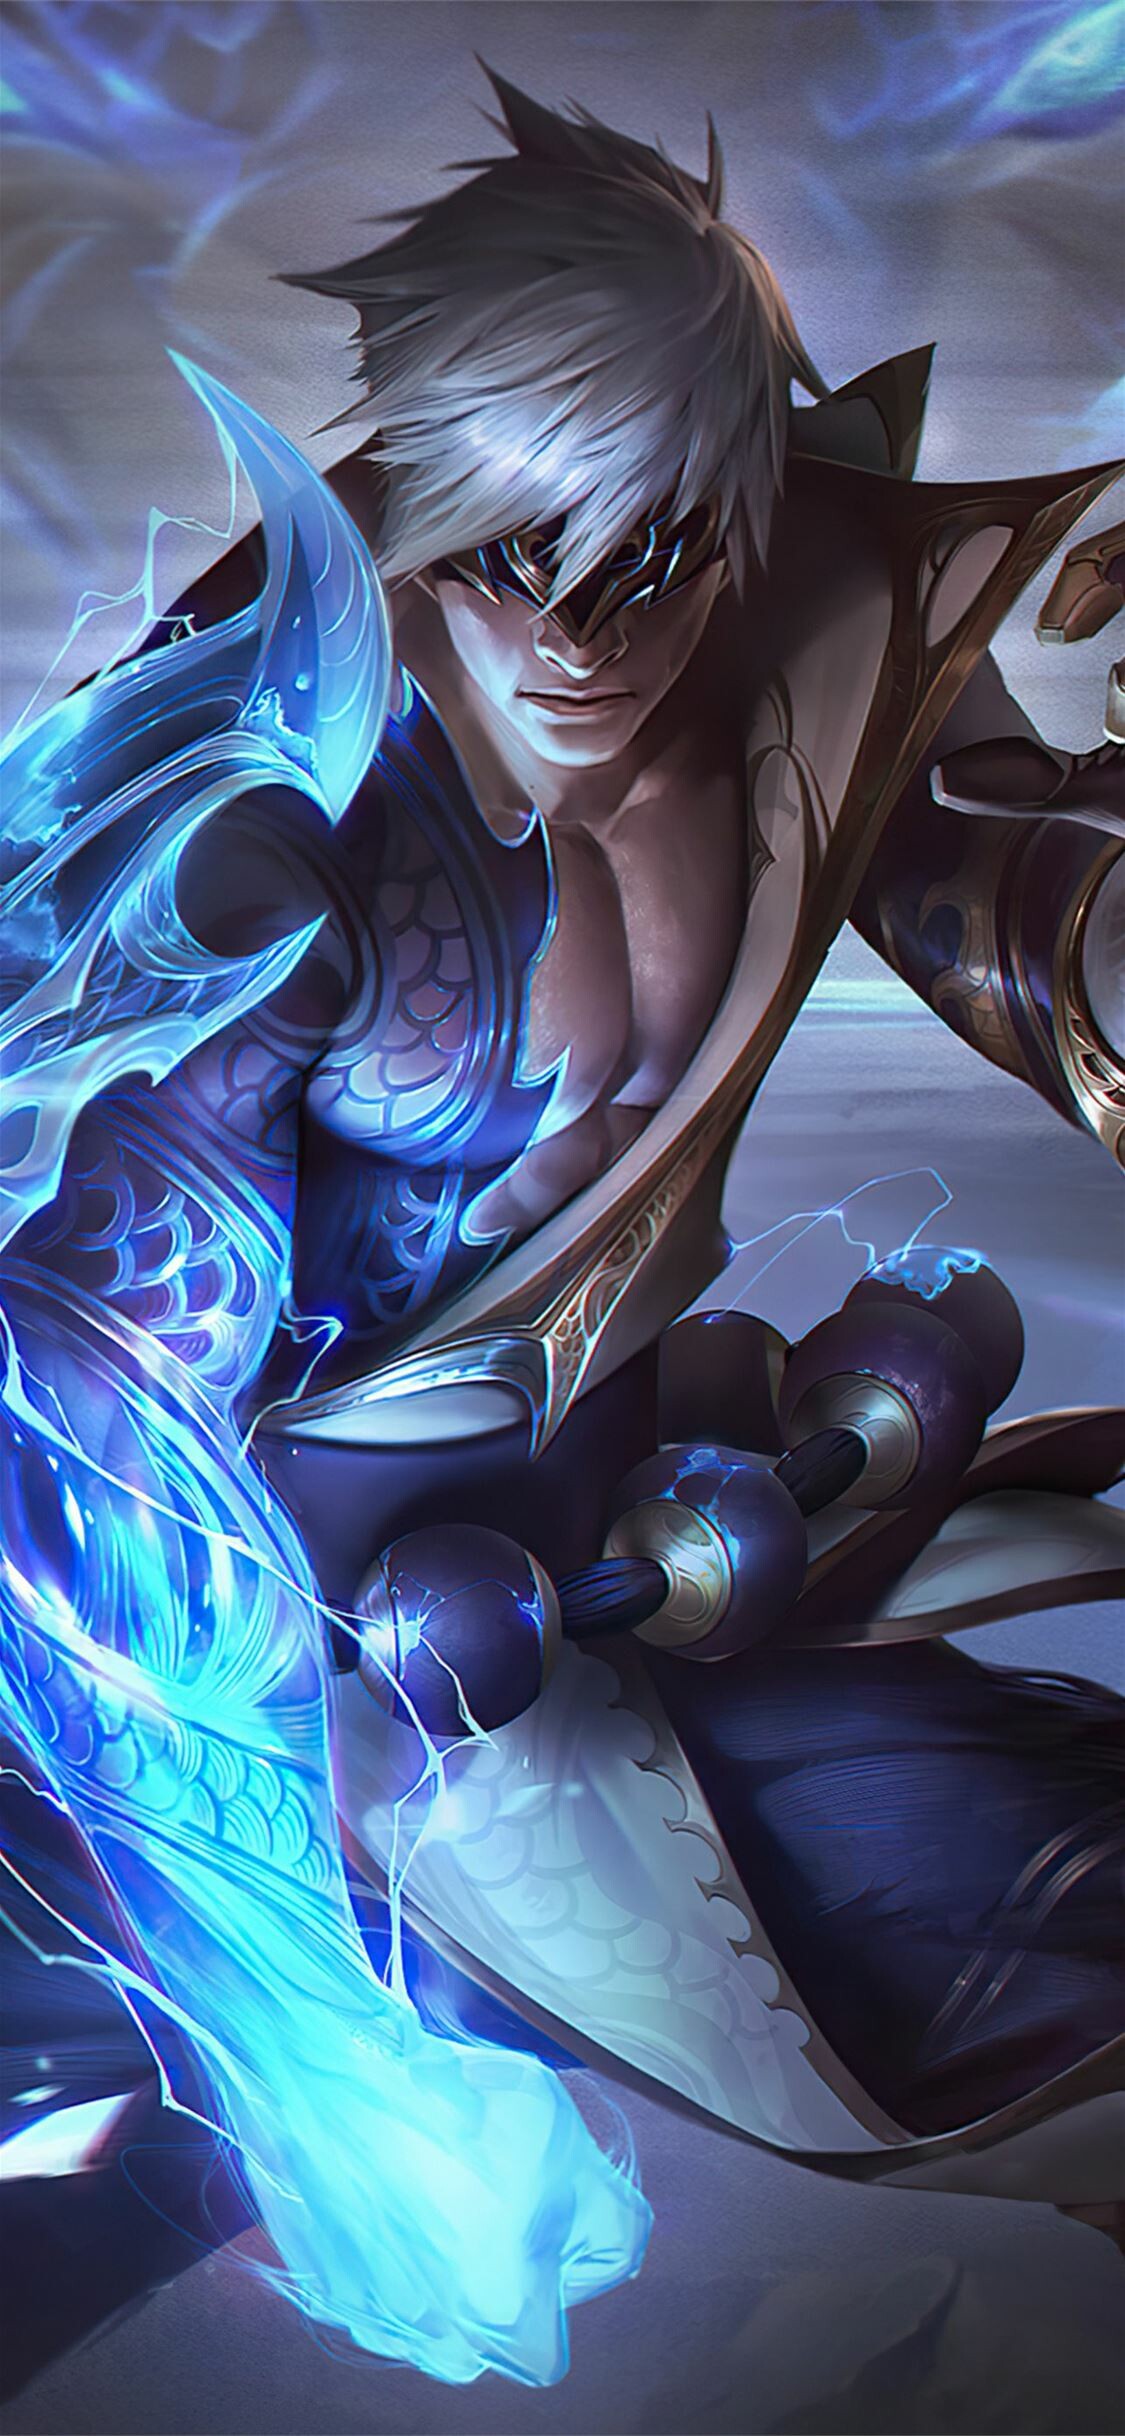 League of Legends: Lee Sin, the Blind Monk, Fighter, Diver. 1130x2440 HD Wallpaper.